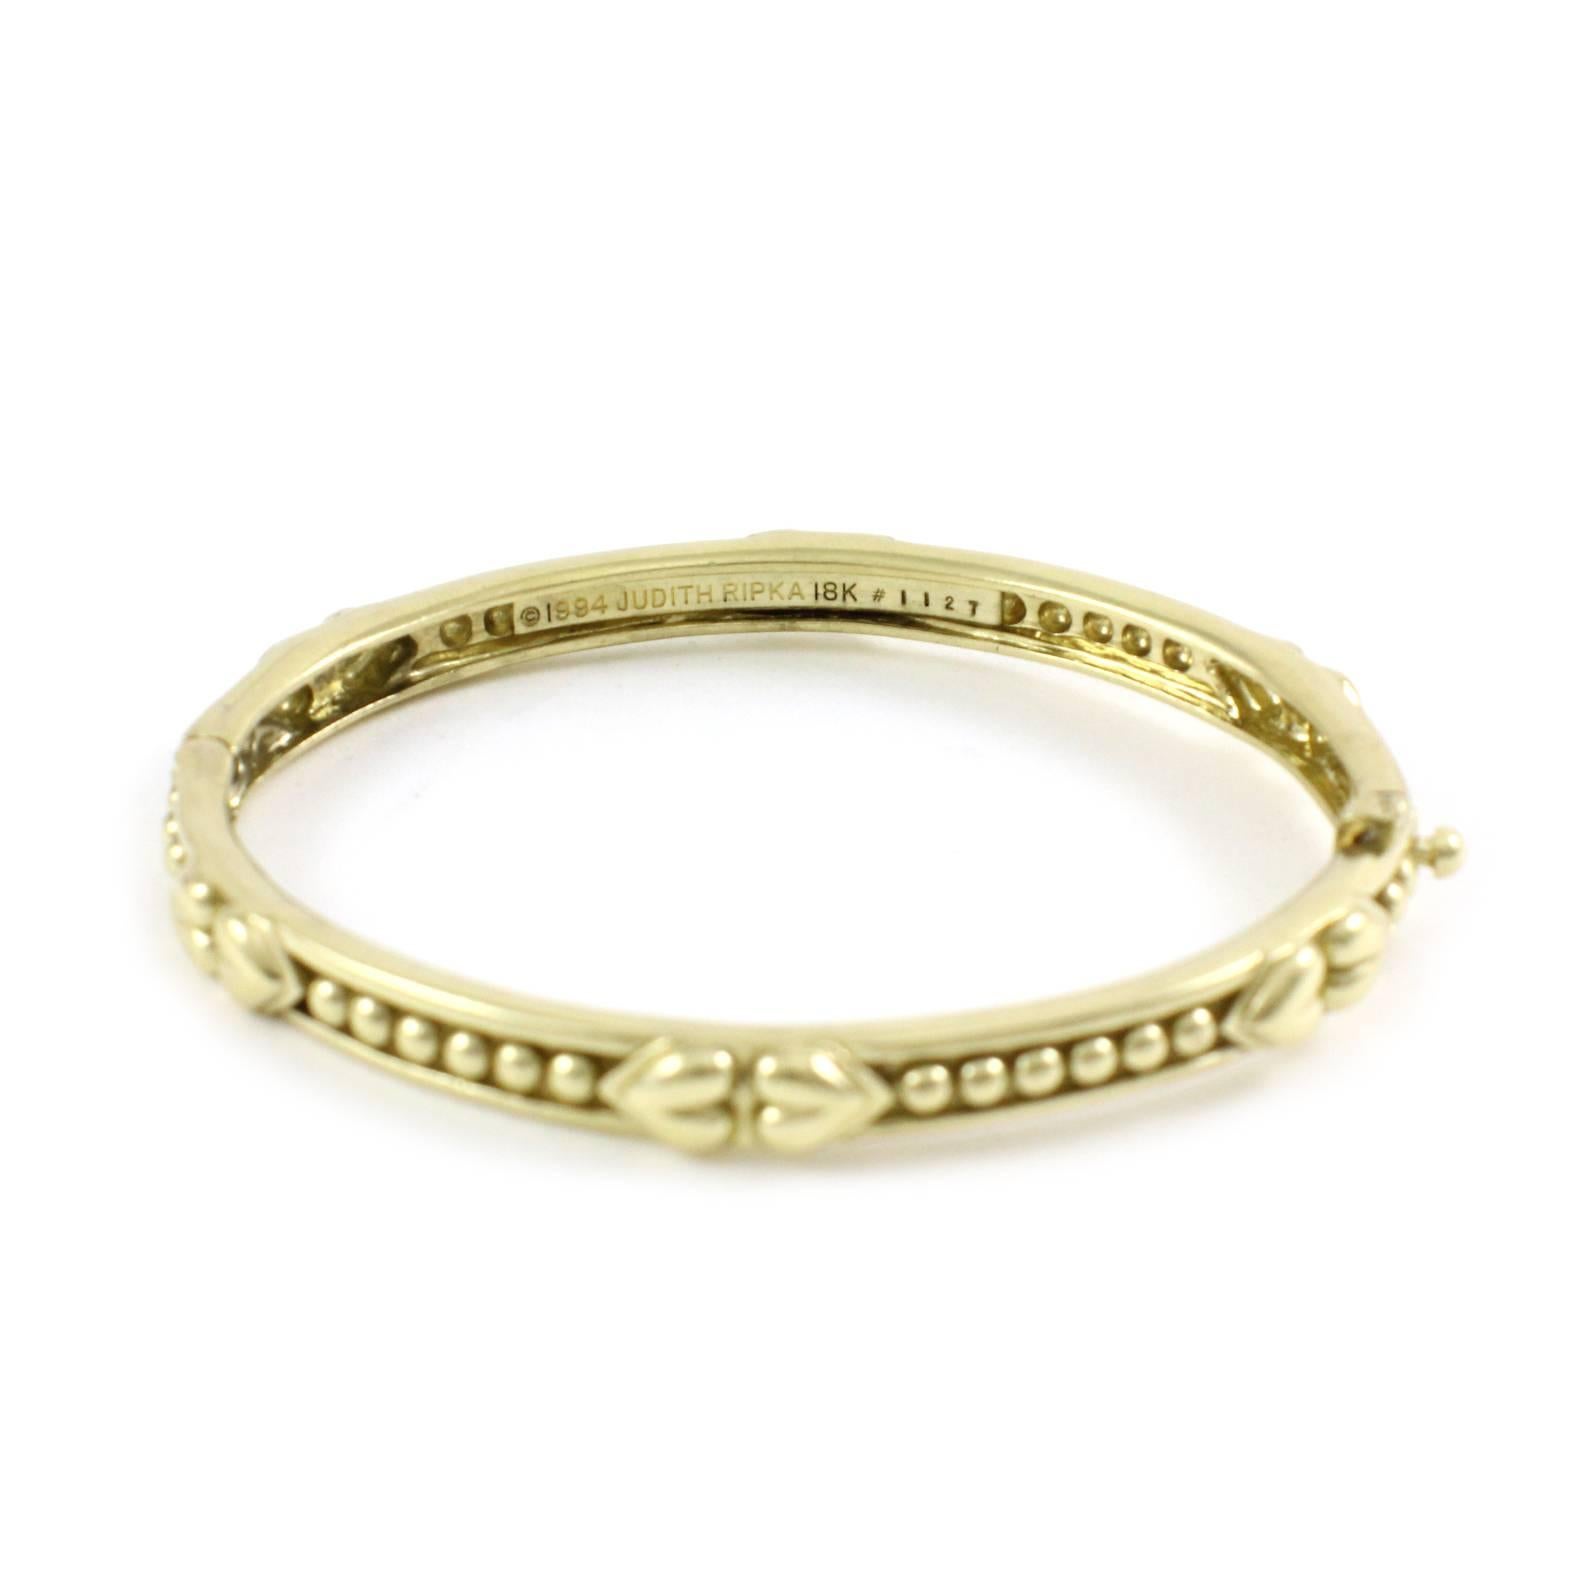 This bangle bracelet is made in 18k yellow gold by Judith Ripka. It is adorned with hearts. The bracelet measures 6mm wide, and it weighs 27.90 grams. The bracelet will fit up to a 6.5-inch wrist. 

The bracelet is signed 